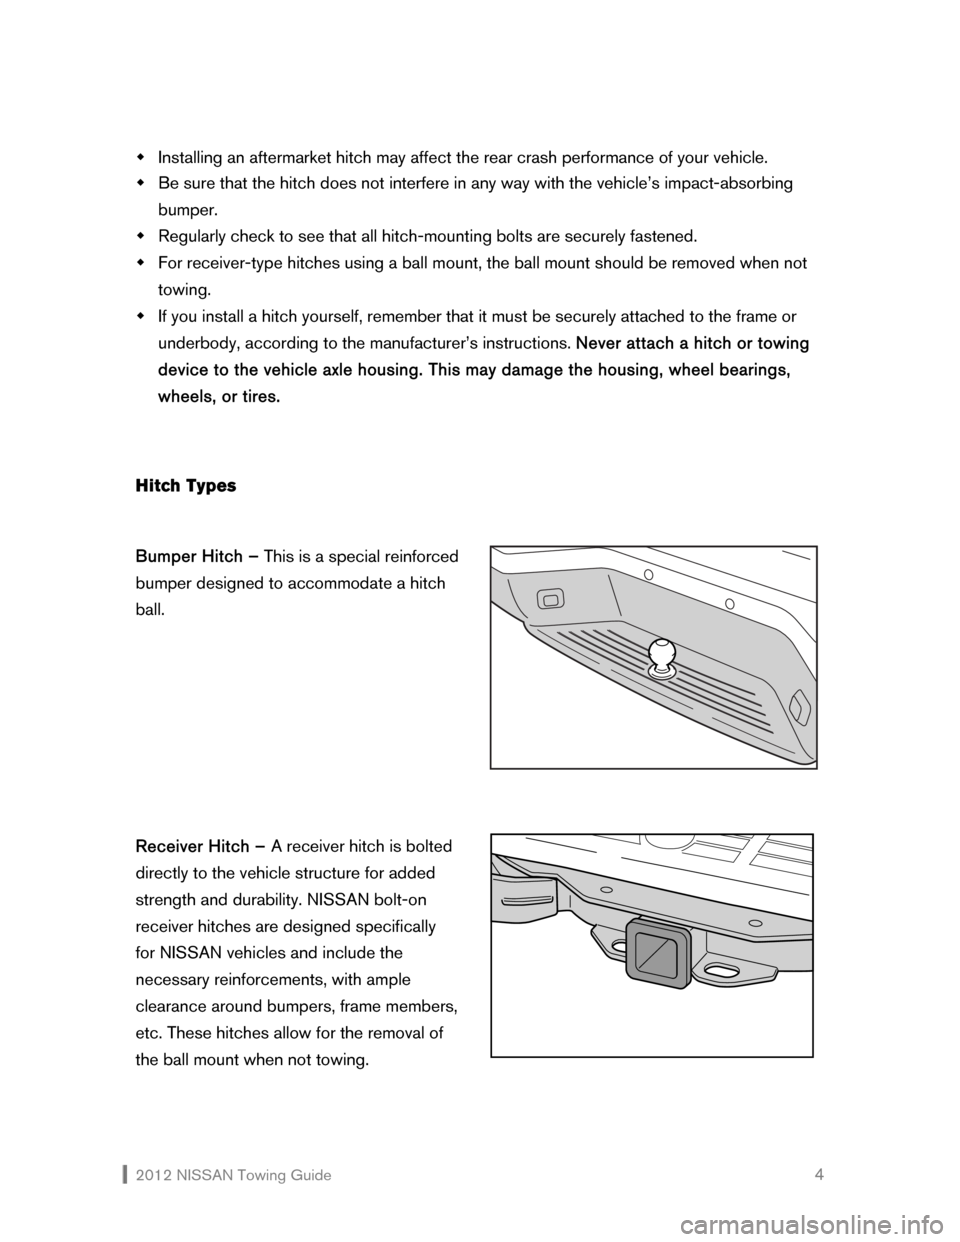 NISSAN MURANO 2012 2.G Towing Guide  2012 NISSAN Towing Guide    4 �Š Installing an aftermarket hitch may affect the rear crash performance of your vehicle. 
�Š Be sure that the hitch does not interfere in any way with the vehicle’s